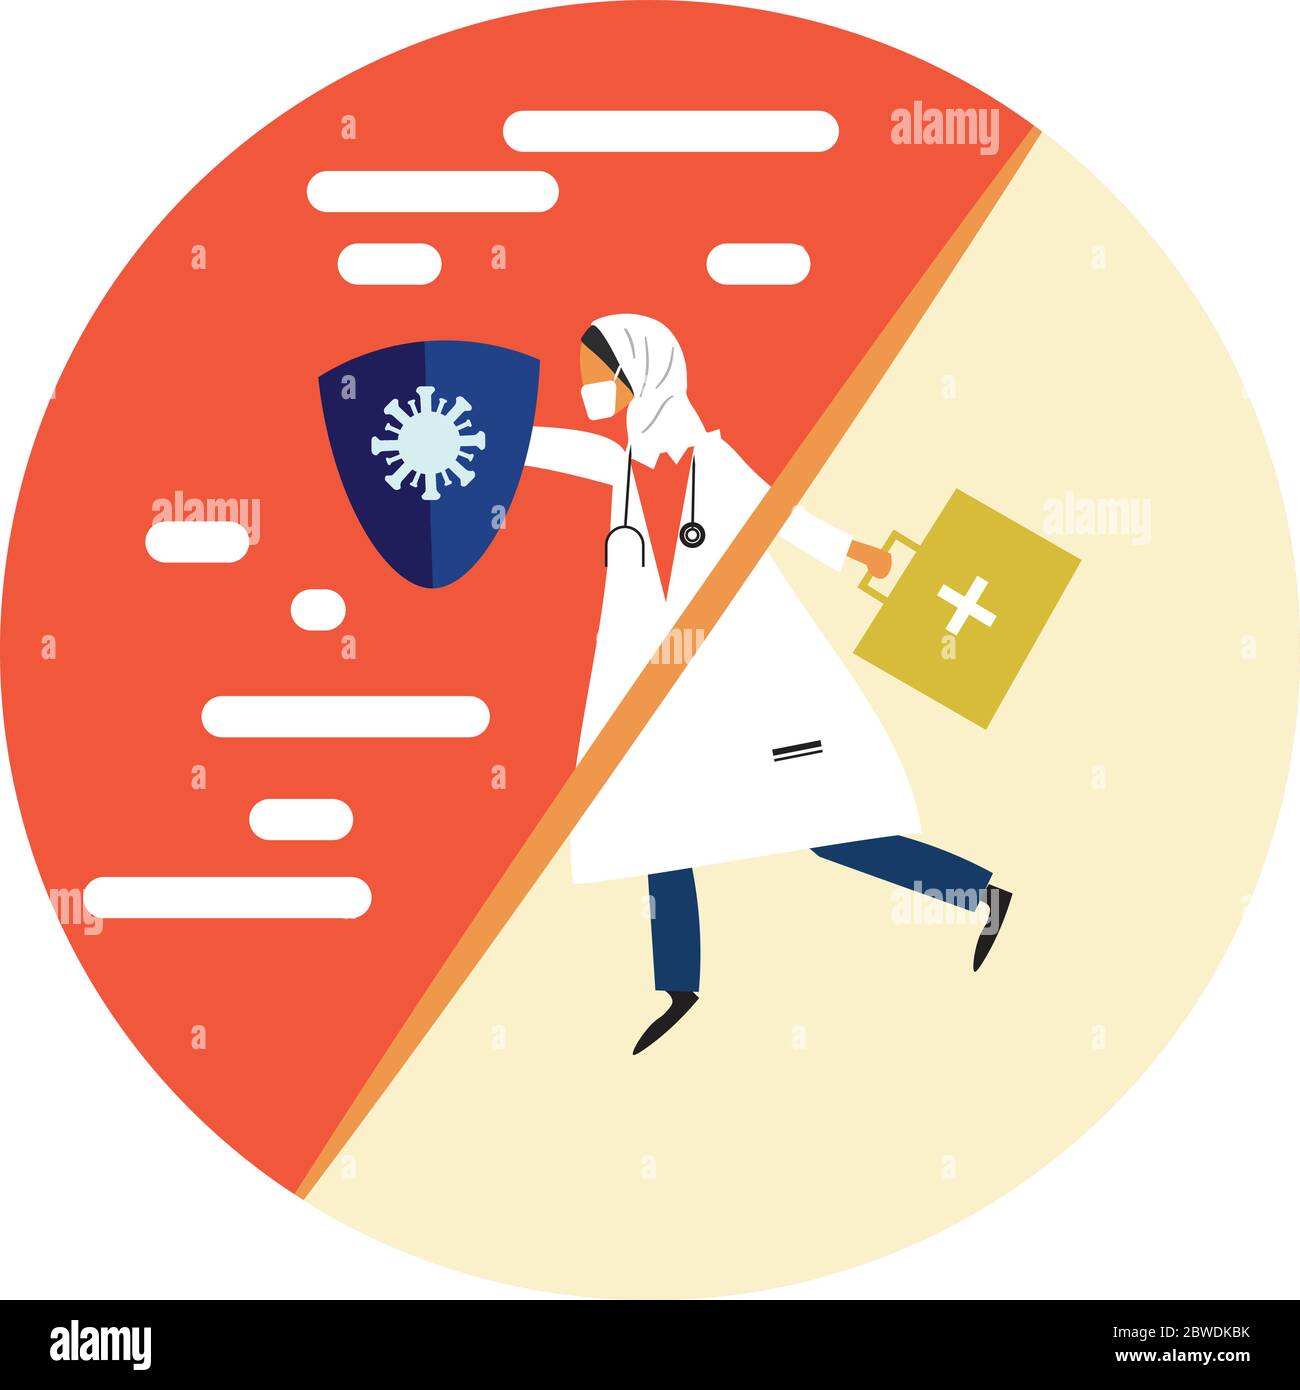 A Masked Hijab Women Doctor using A Shield runs From Normal into New Normal Condition Due to Corona Virus Covid 19 Pandemic Stock Vector